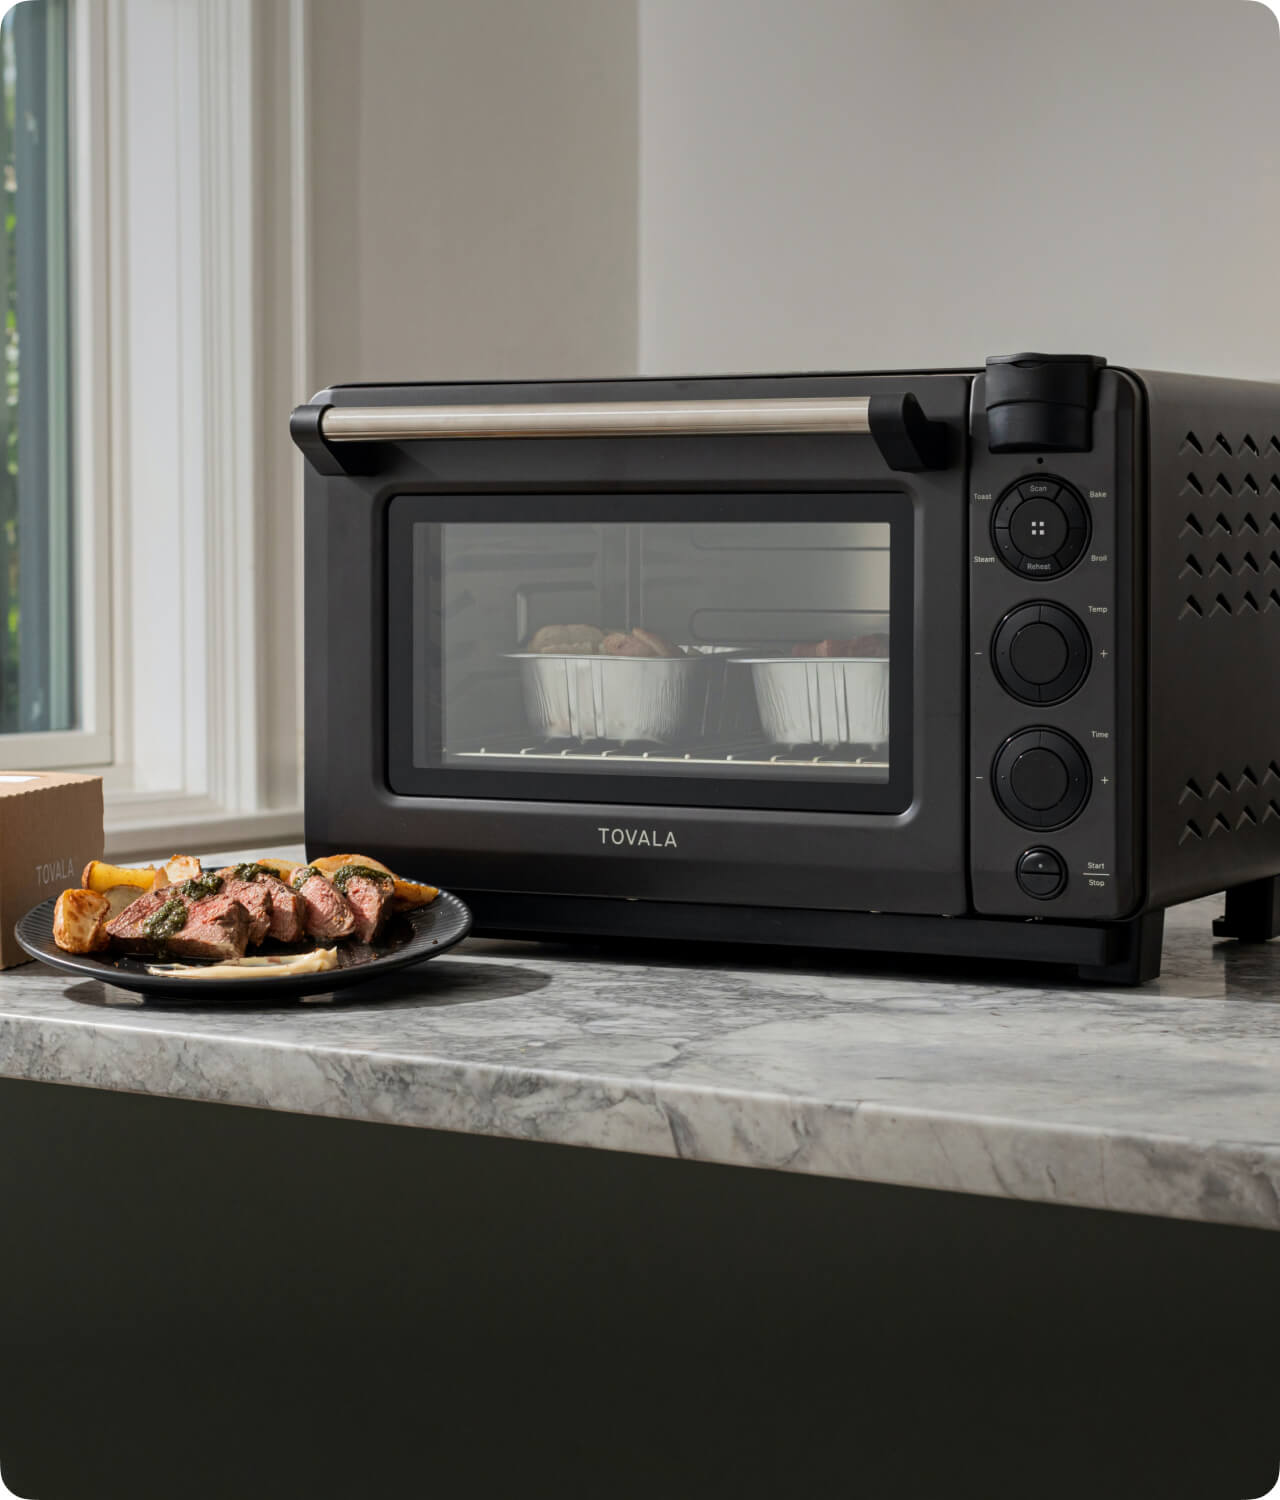 A Look At Tovala: A Smart Oven Meal Delivery Service! - Hello Subscription